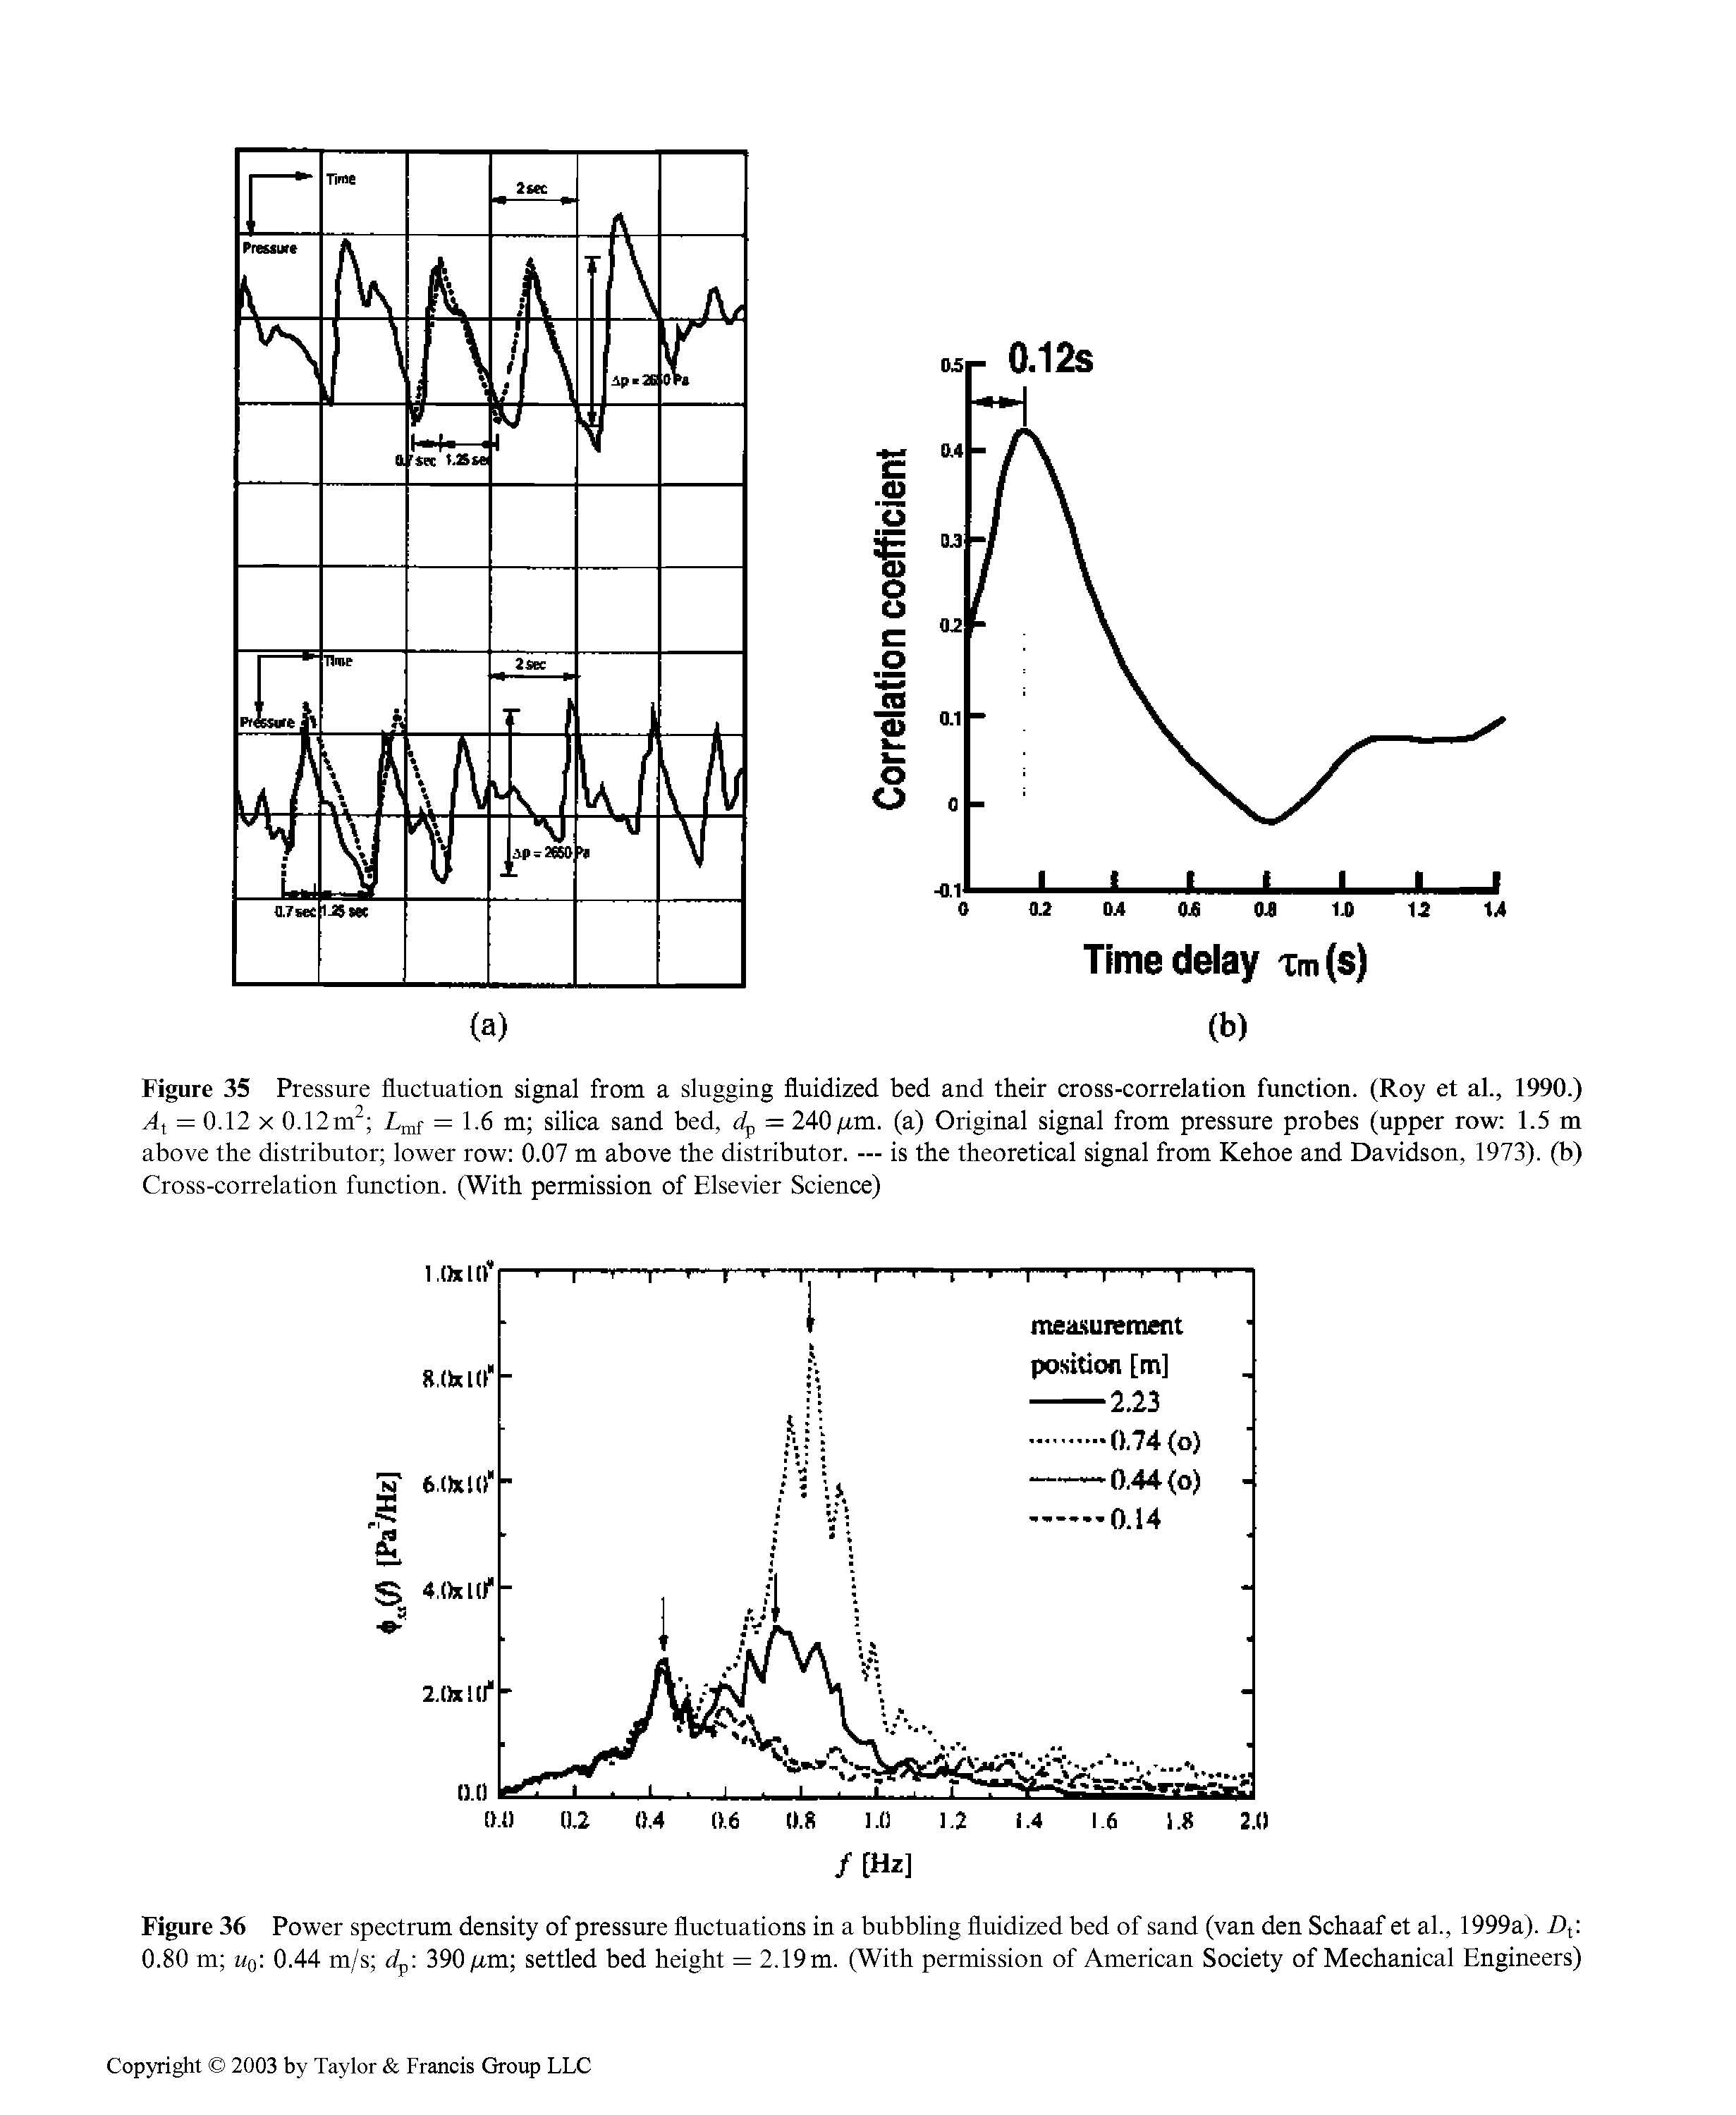 Figure 35 Pressure fluctuation signal from a slugging fluidized bed and their cross-correlation function. (Roy et al., 1990.) At = 0.12 X 0.12m = 1.6 m silica sand bed, dp = 240(a) Original signal from pressure probes (upper row 1.5 m...